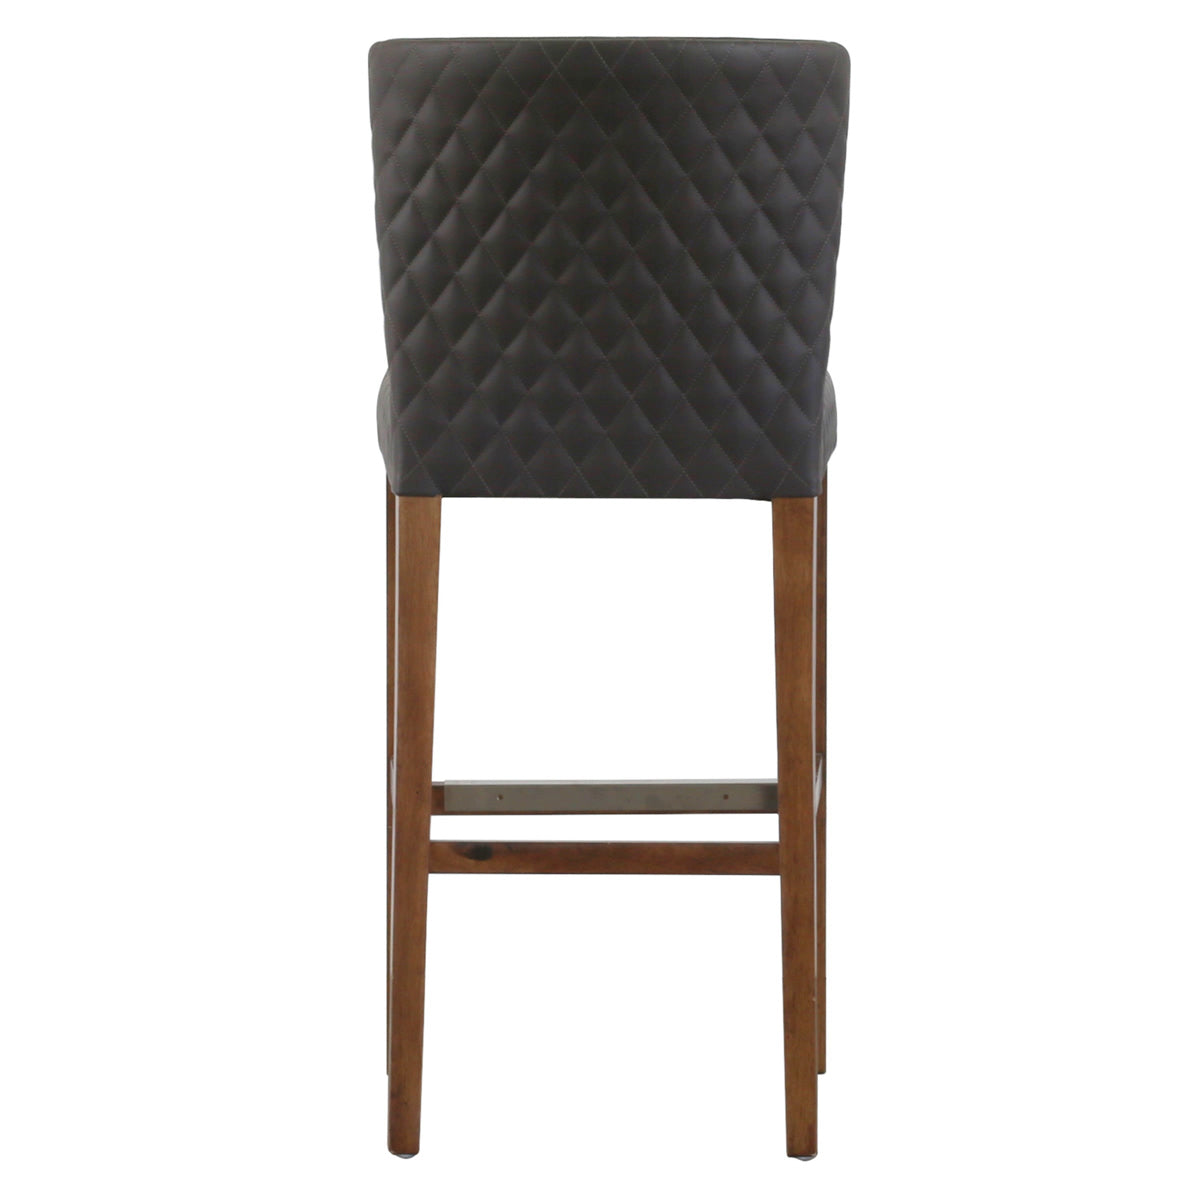 Albie Diamond Stitching PU Leather Bar Stool - Set of 2 by New Pacific Direct - 3900055-401